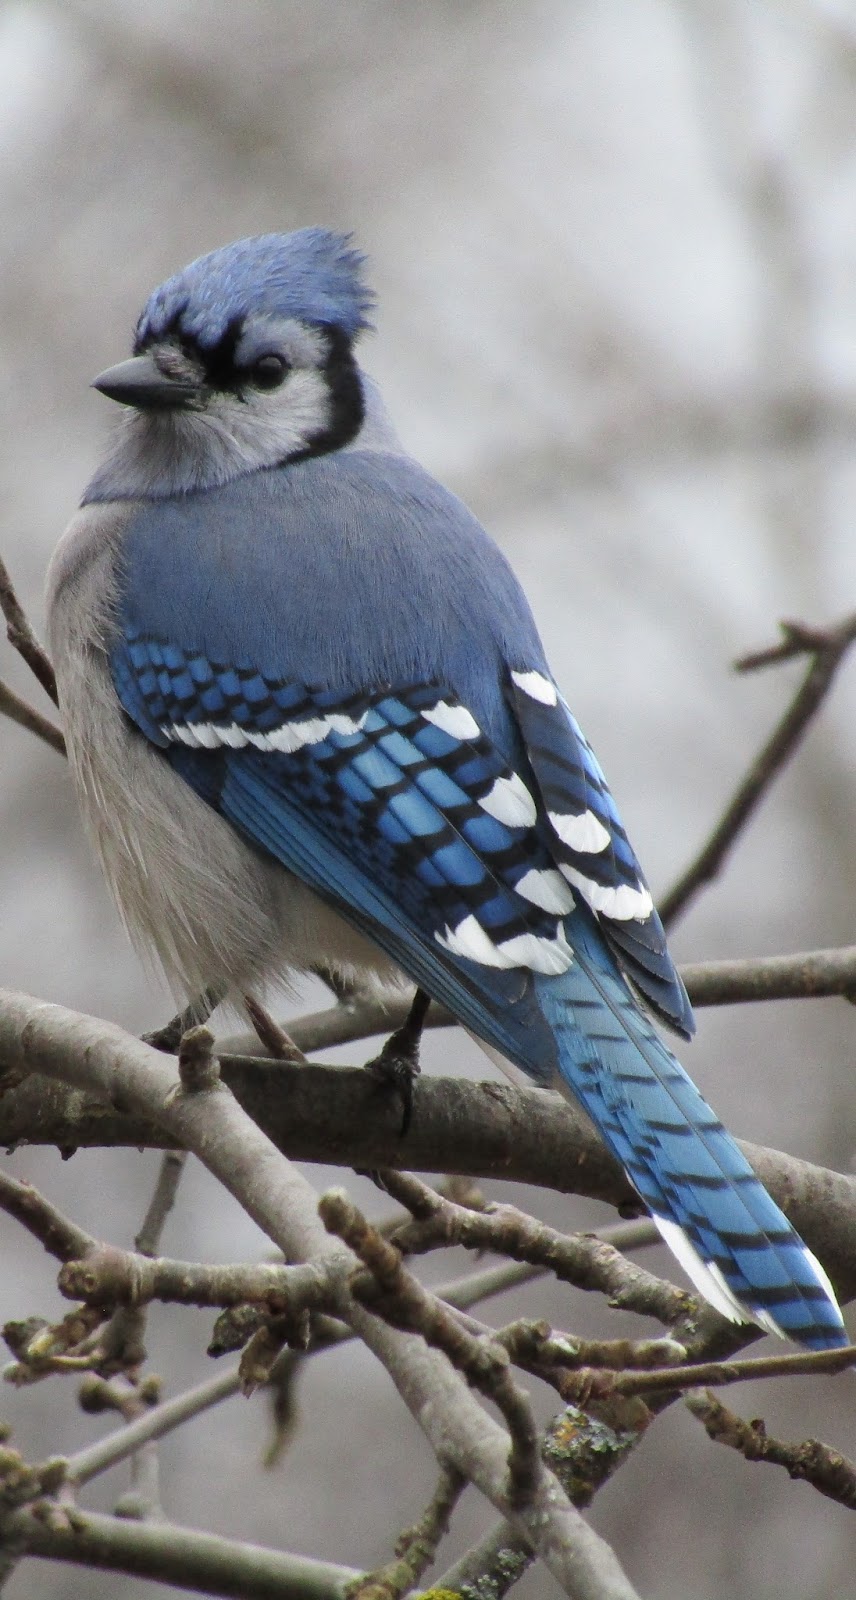 Picture of a blue jay bird.